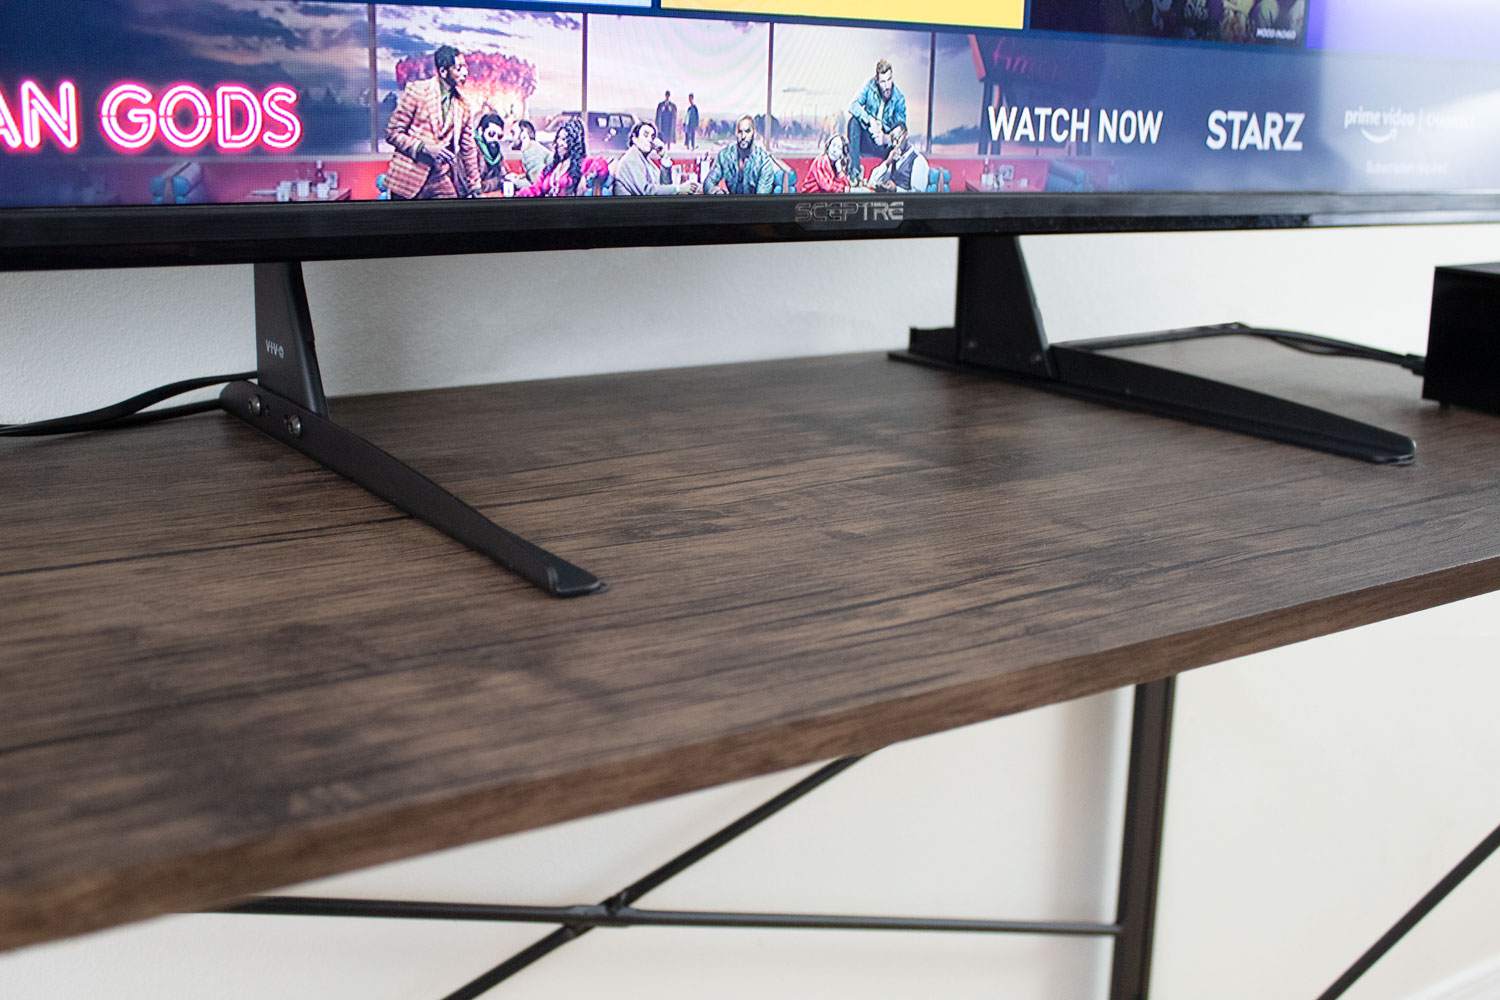 Vivo Universal TV Stand Review: Sturdy Support For Your Flat Screen TV